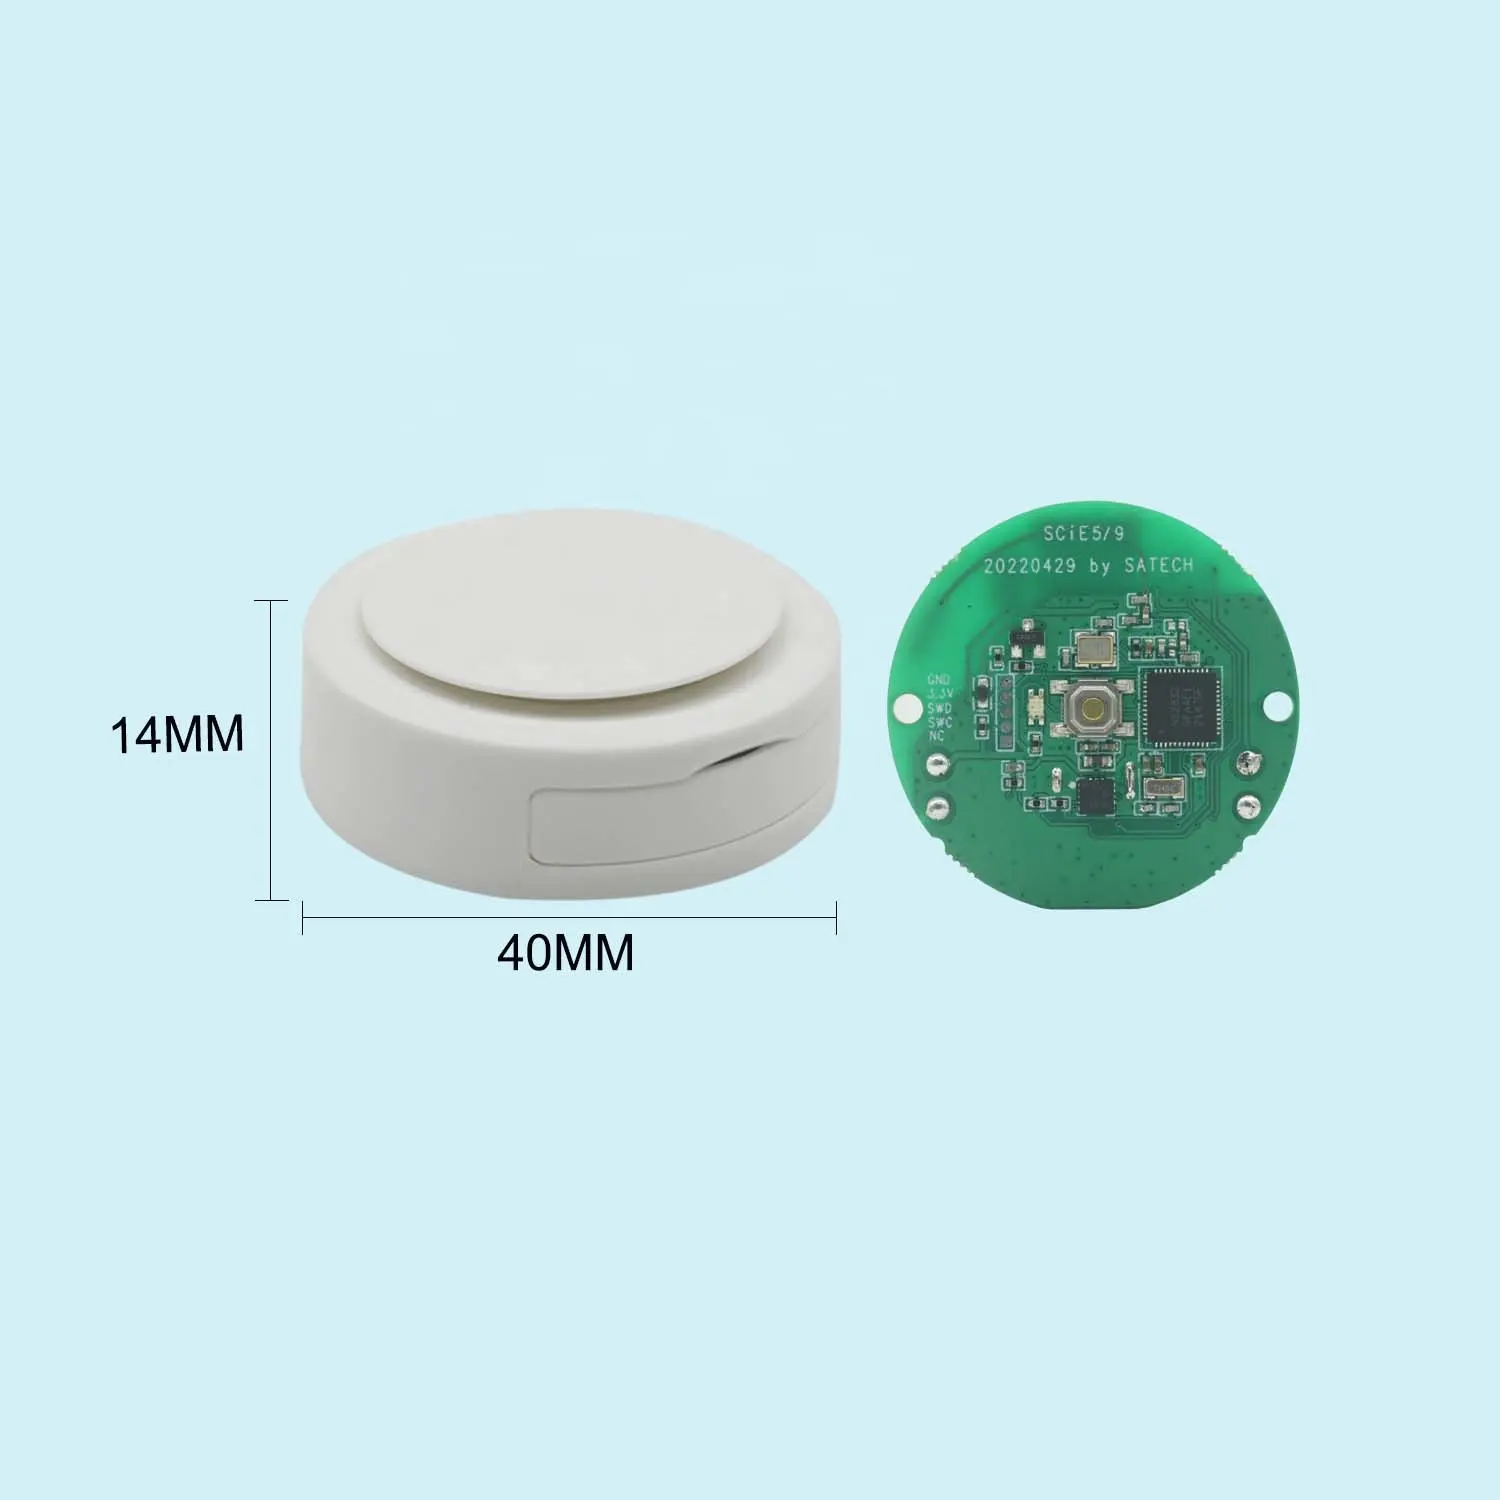 IoT hardware OEM/ODM original manufacturer SATECH provides iBeacon Eddystone BLE5.0 Bluetooth push buttons/sensors/tags/beacons